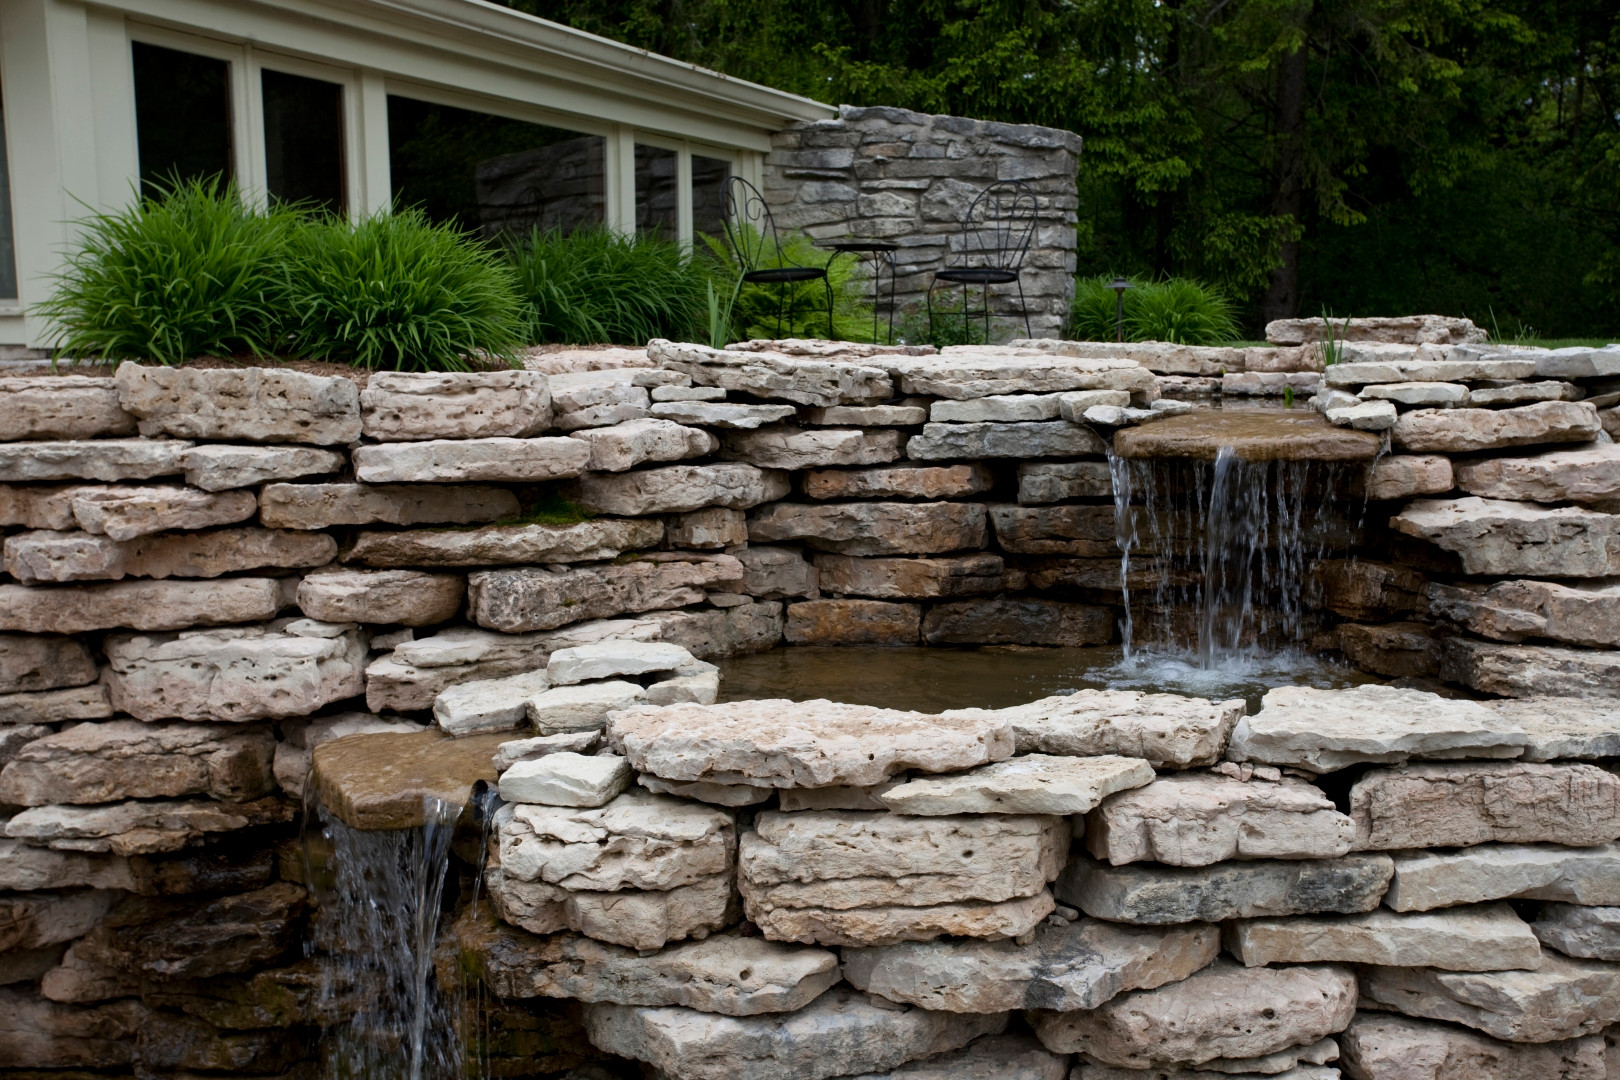 A recirculating water feature is included in this retaining wall in Mequon, WI.